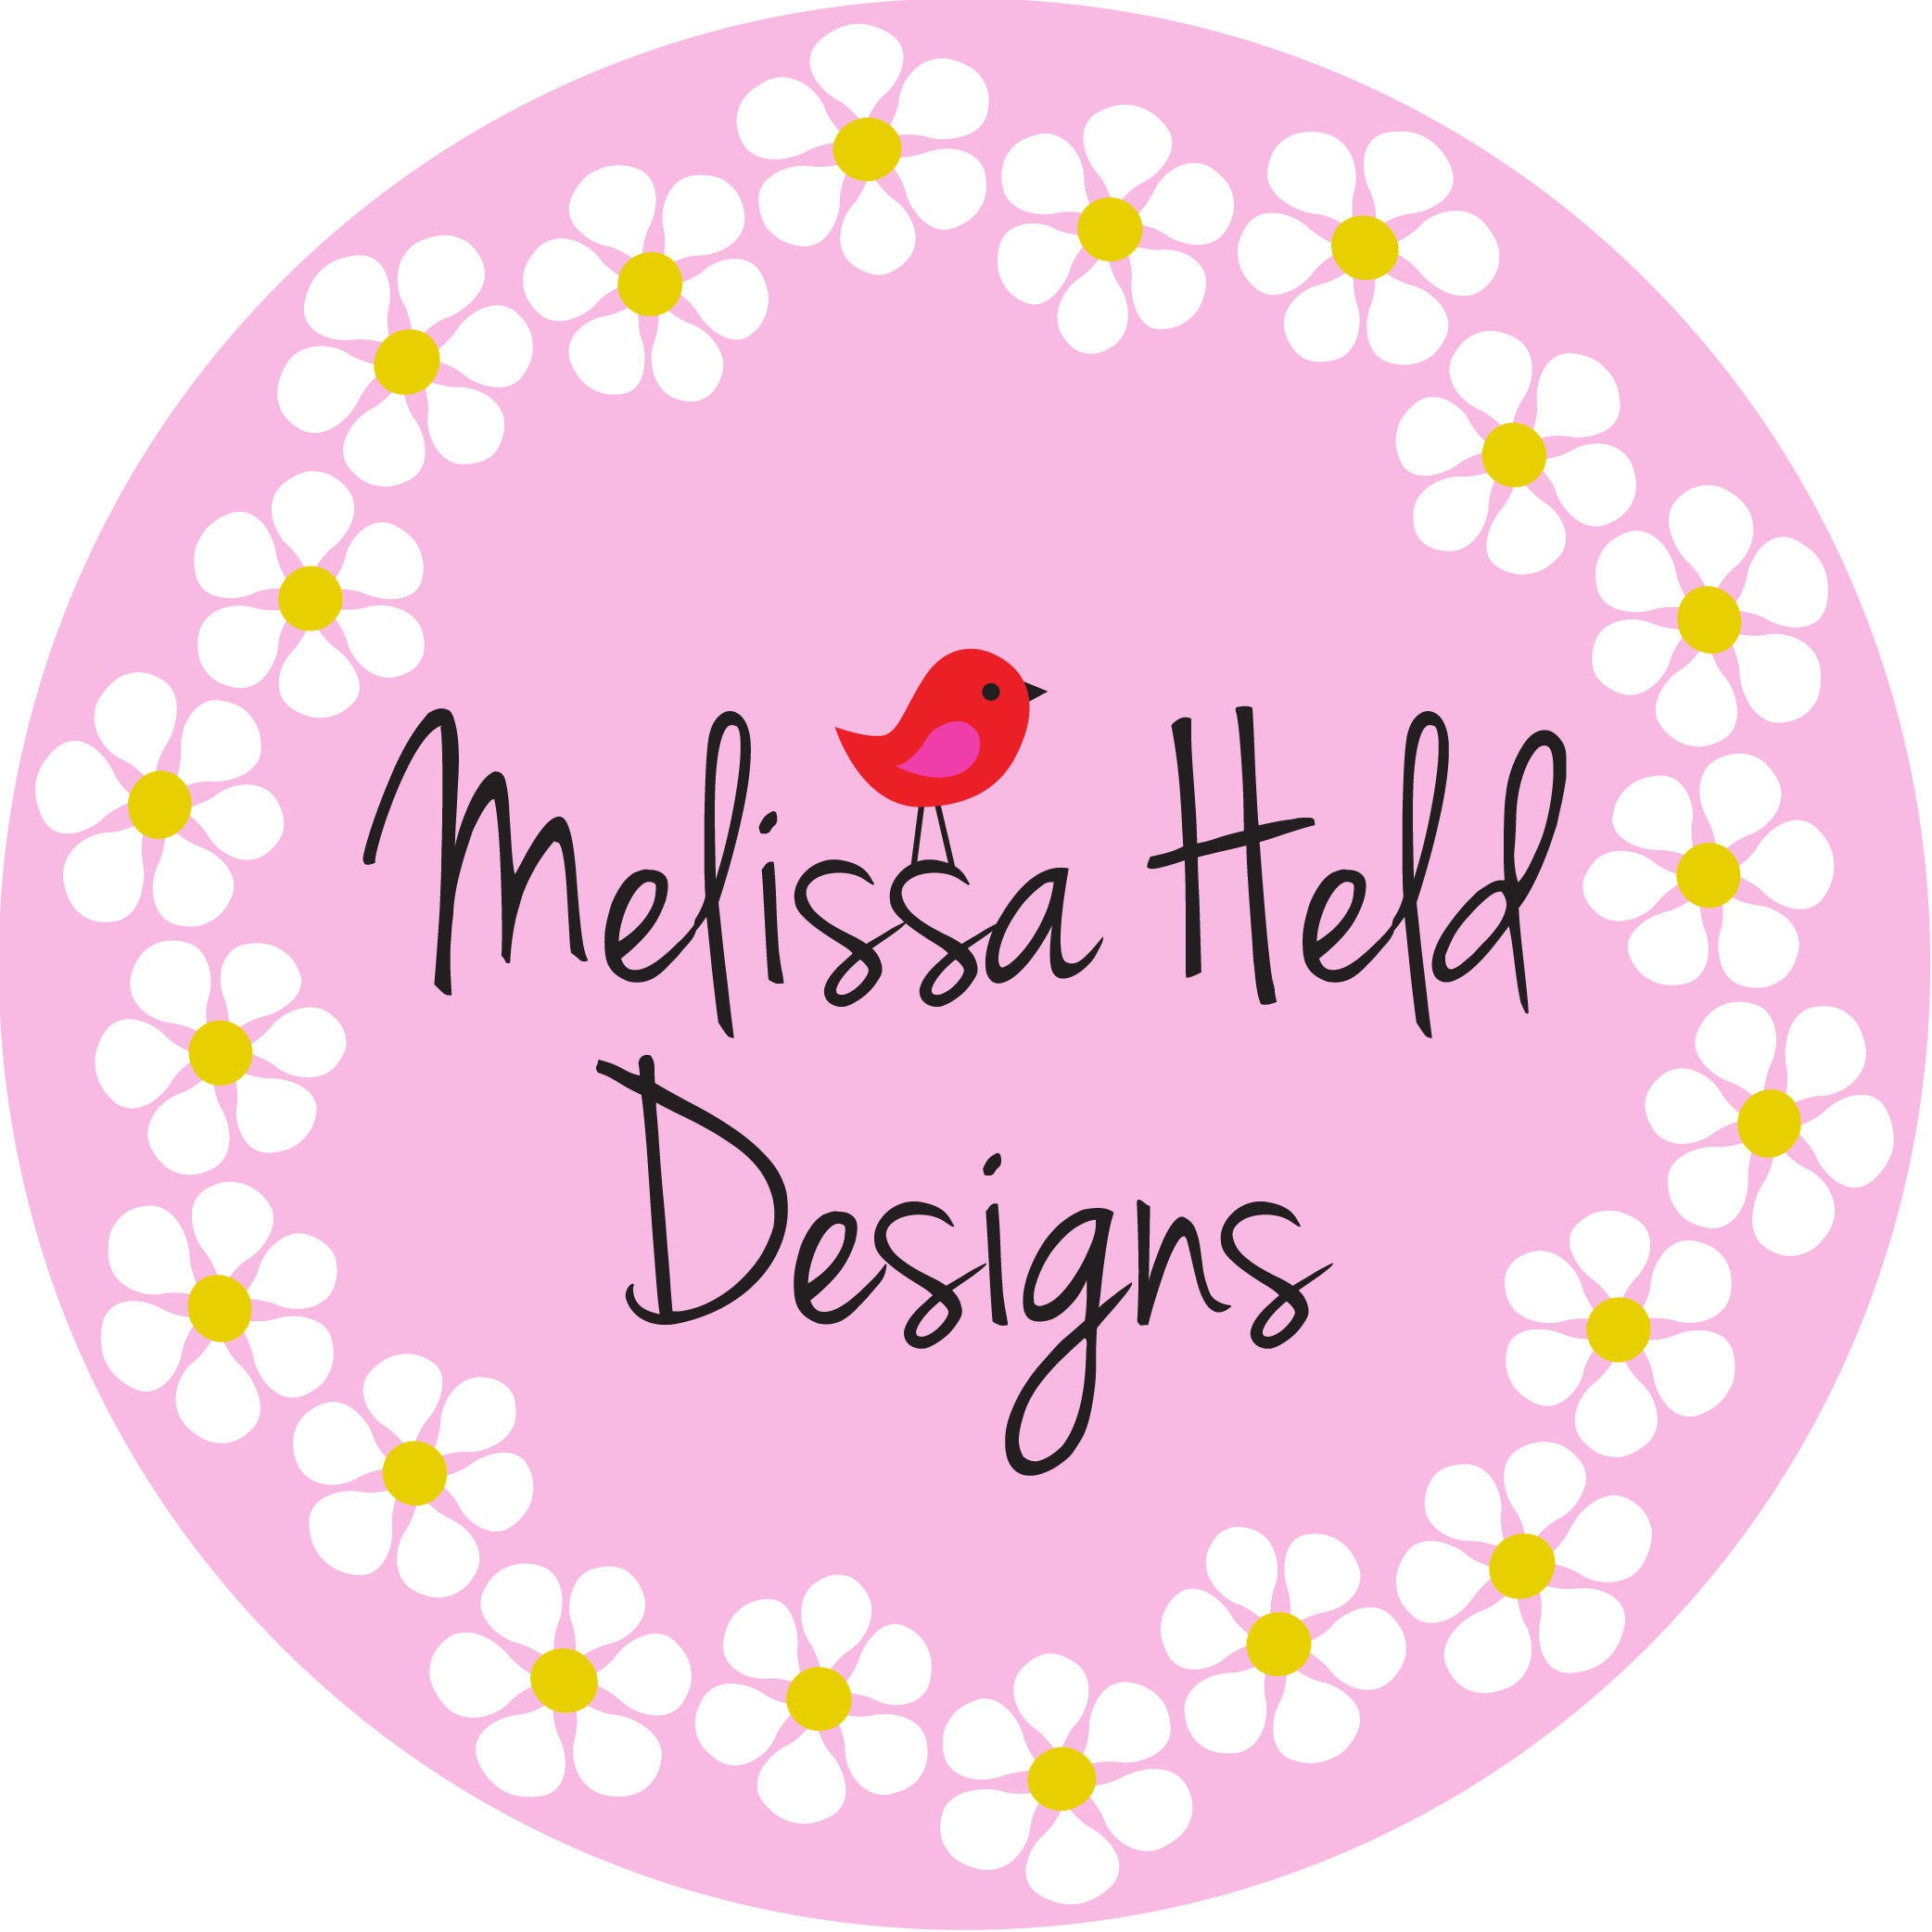 Valentine's Day Washi Tape Clipart Graphic by Melissa Held Designs ·  Creative Fabrica